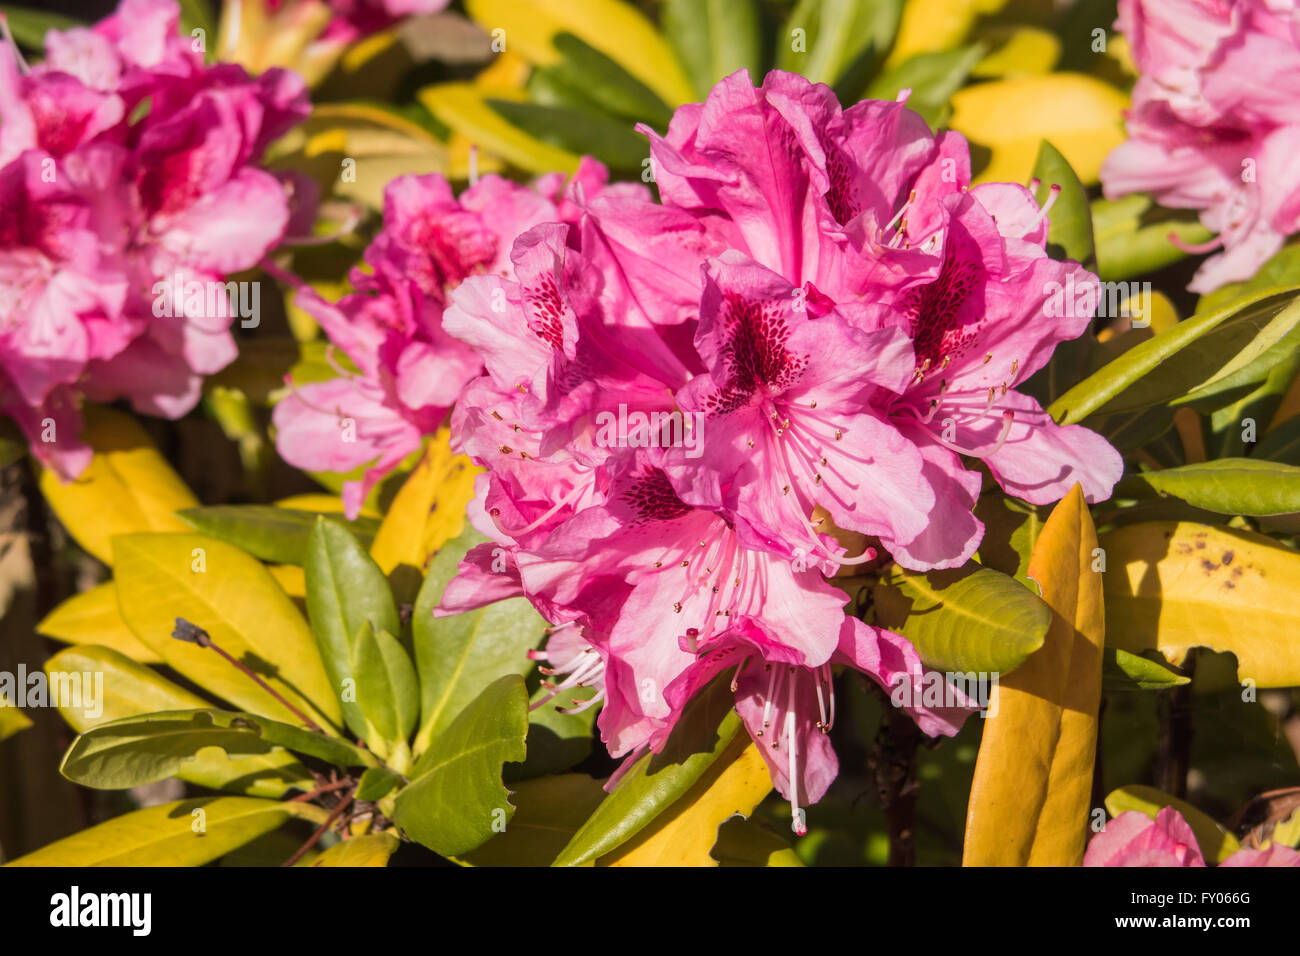 The beautiful pink flowers of the Rhododendron plant Stock Photo